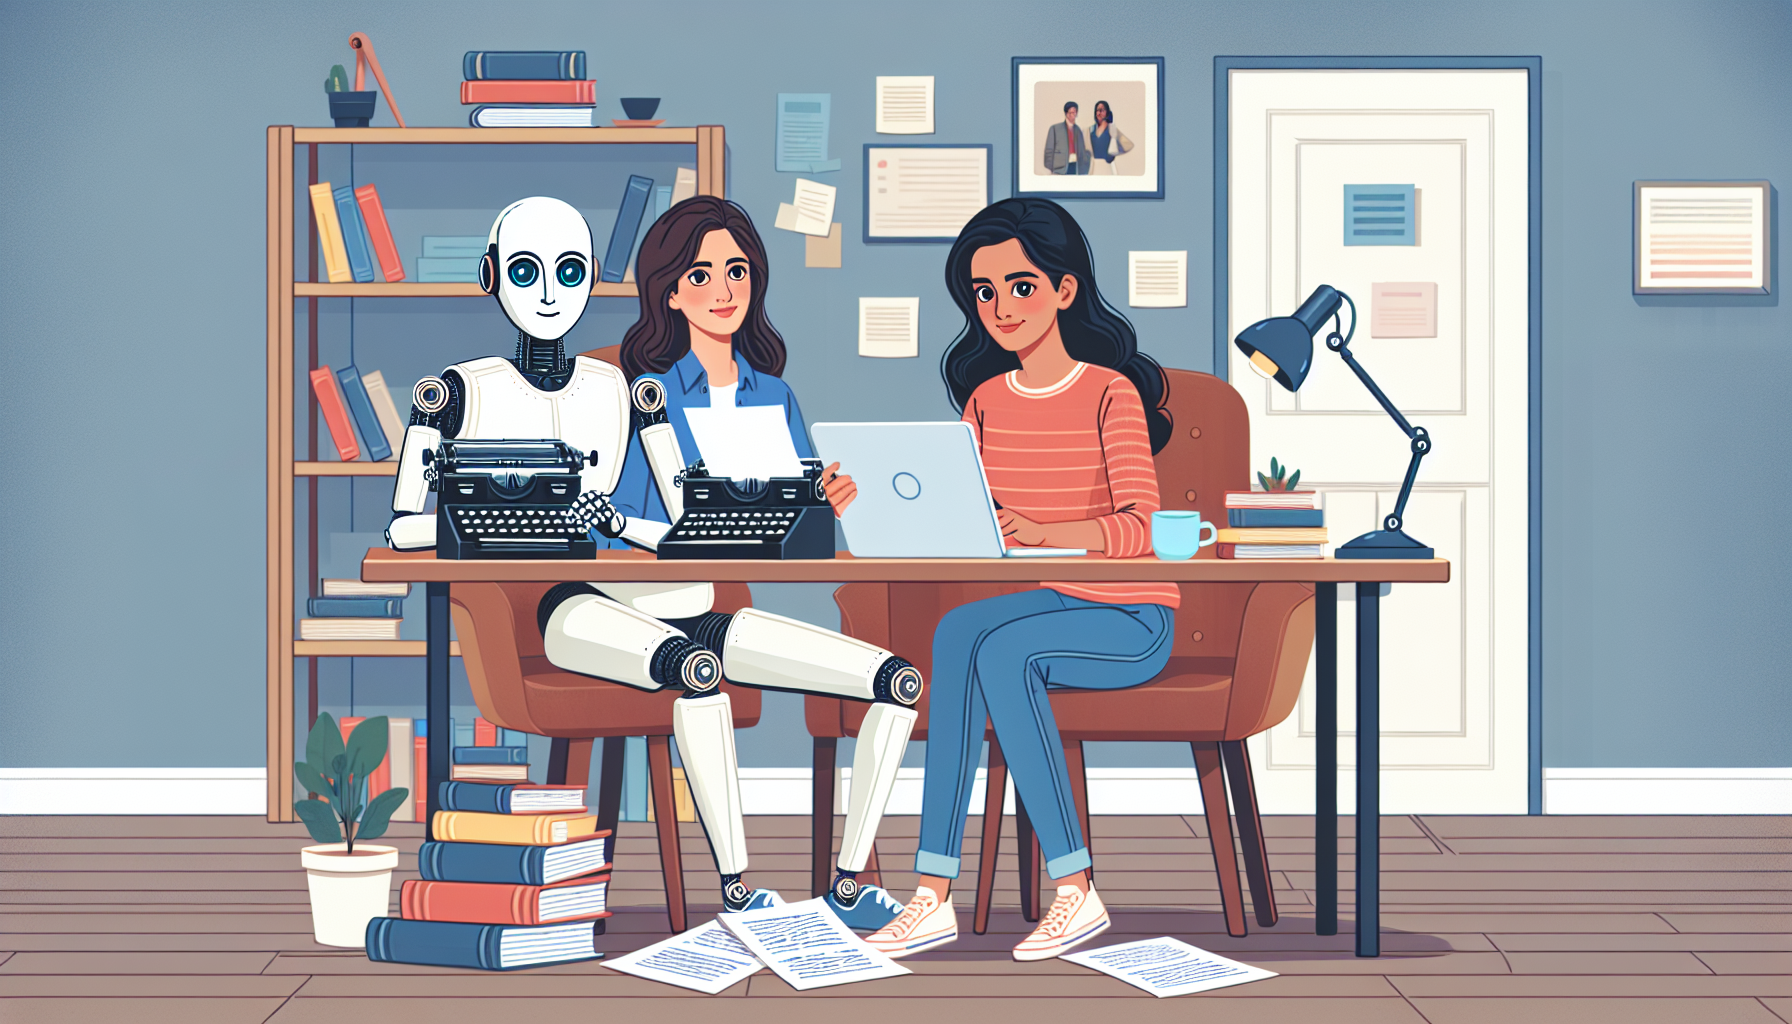 An image of a young female screenwriter and a futuristic AI robot sitting together at a desk filled with scripts and a vintage typewriter in a cozy, well-lit home office, brainstorming ideas and writi